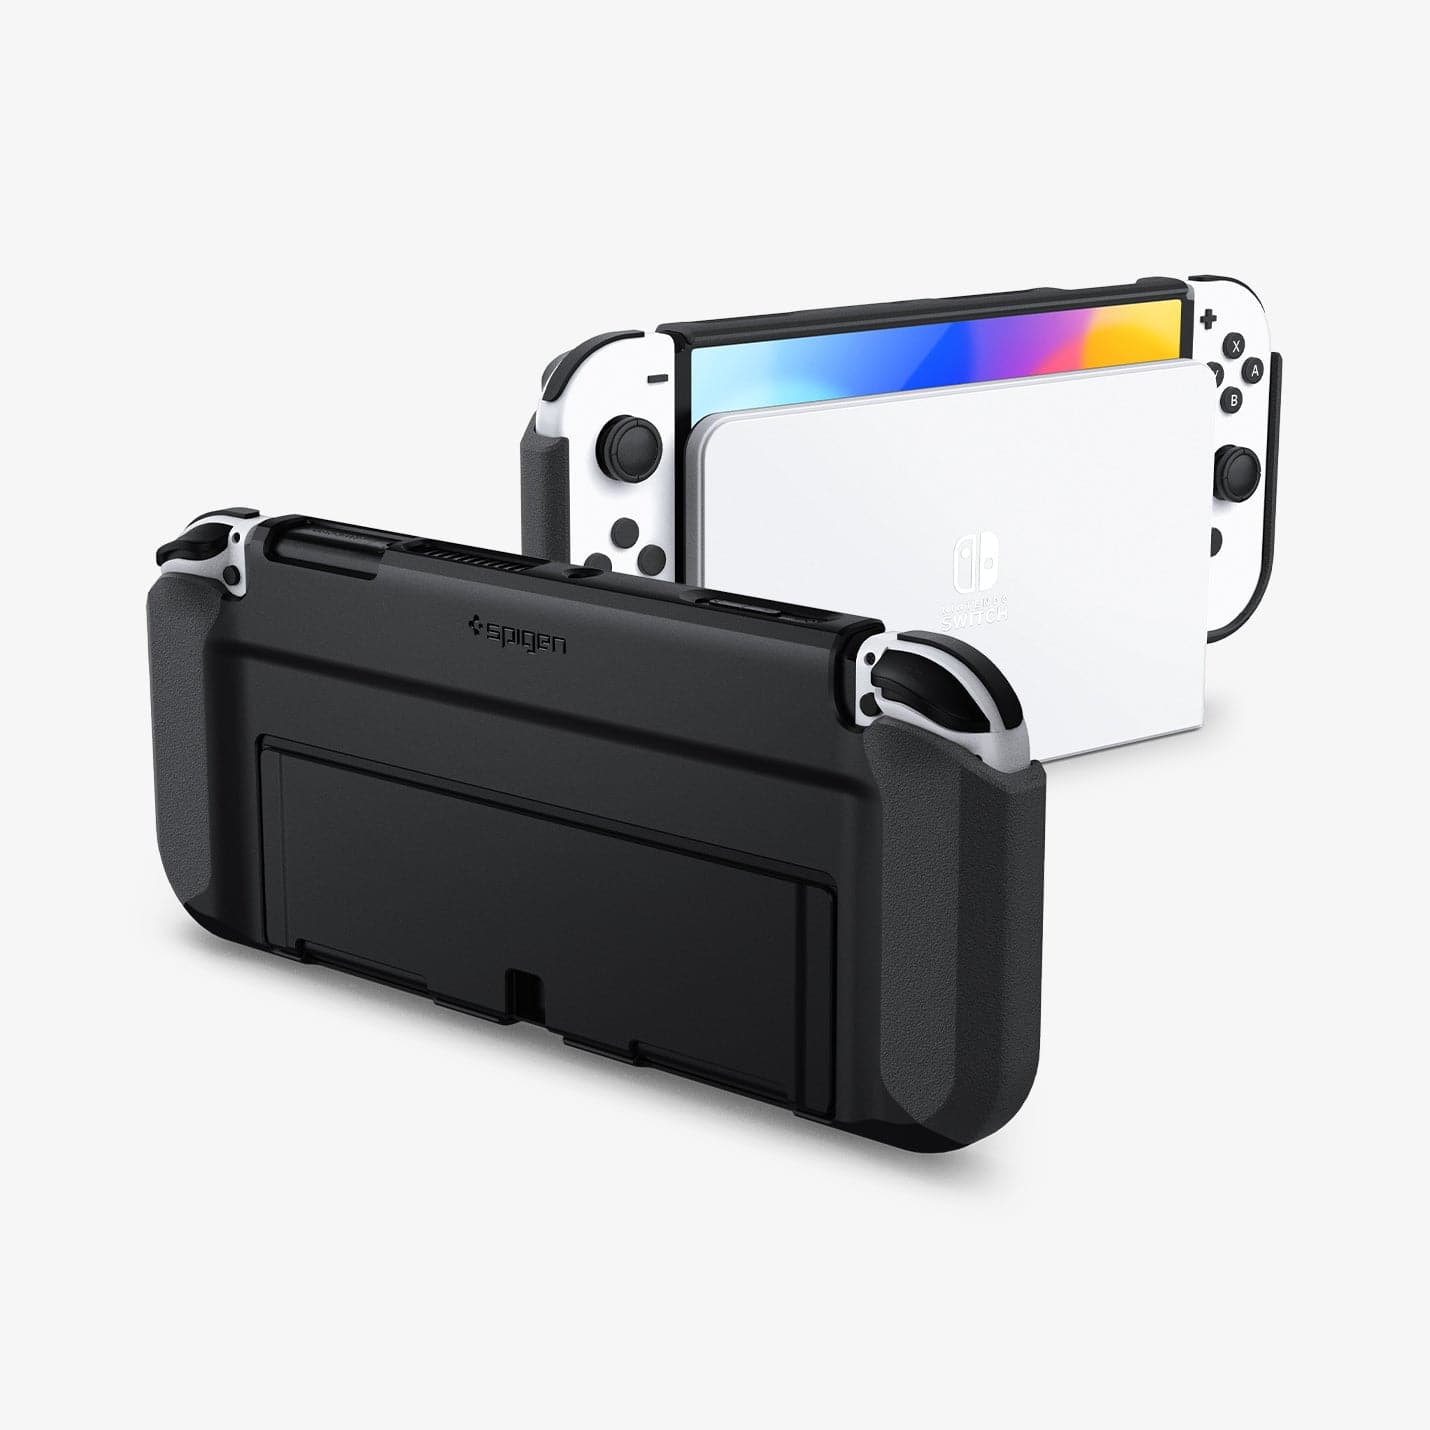 ACS04239 - Nintendo Switch OLED Case Thin Fit in black showing the back, sides and front in dock